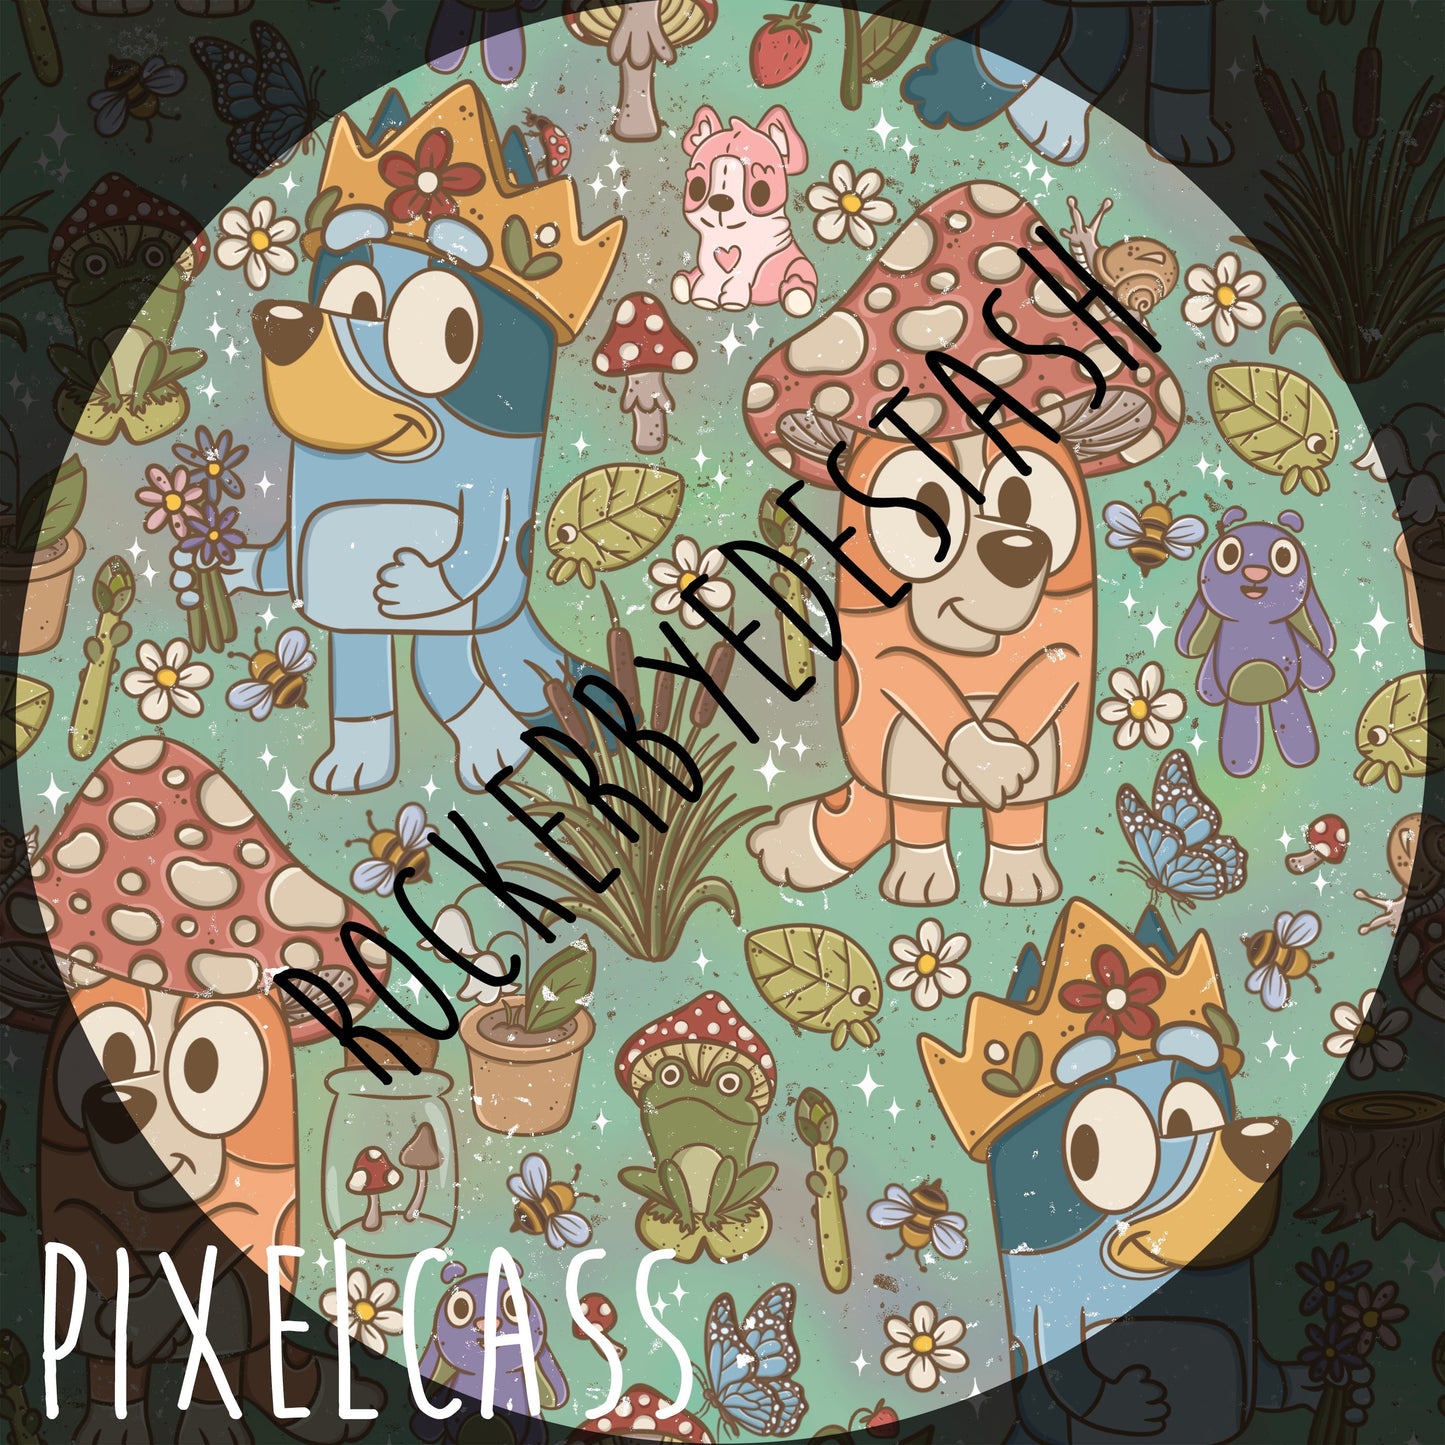 Minky - PixelCass Collab Retail Round YY - super special flower, pride & cottagecore fabric things inside